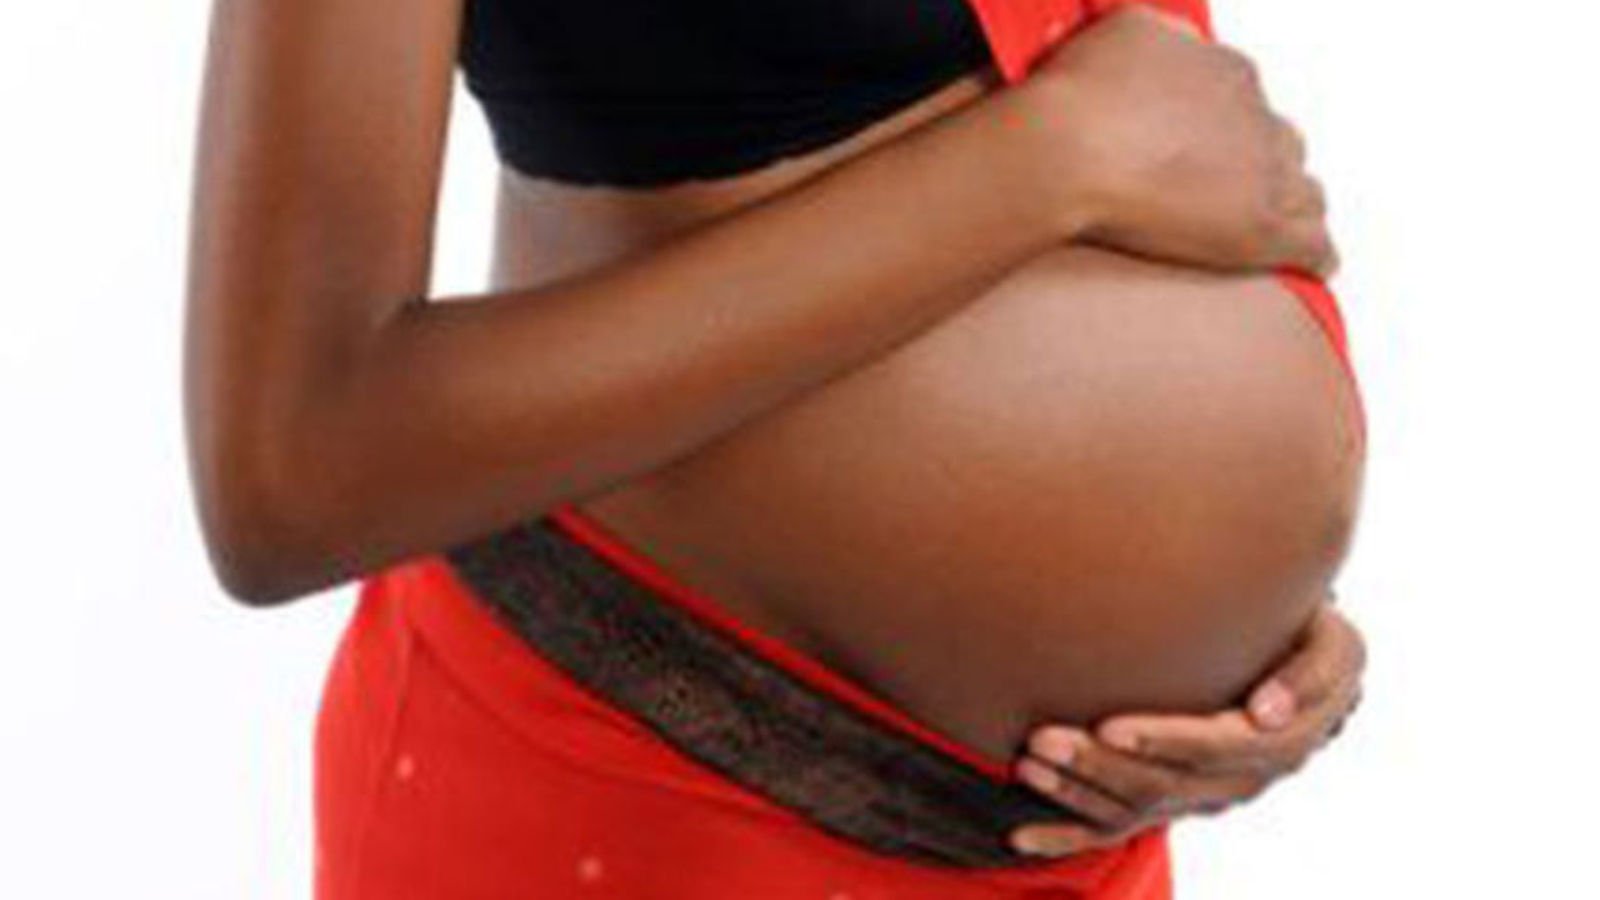 Getting Pregnant At 40: Benefits, Risks, And Useful Tips